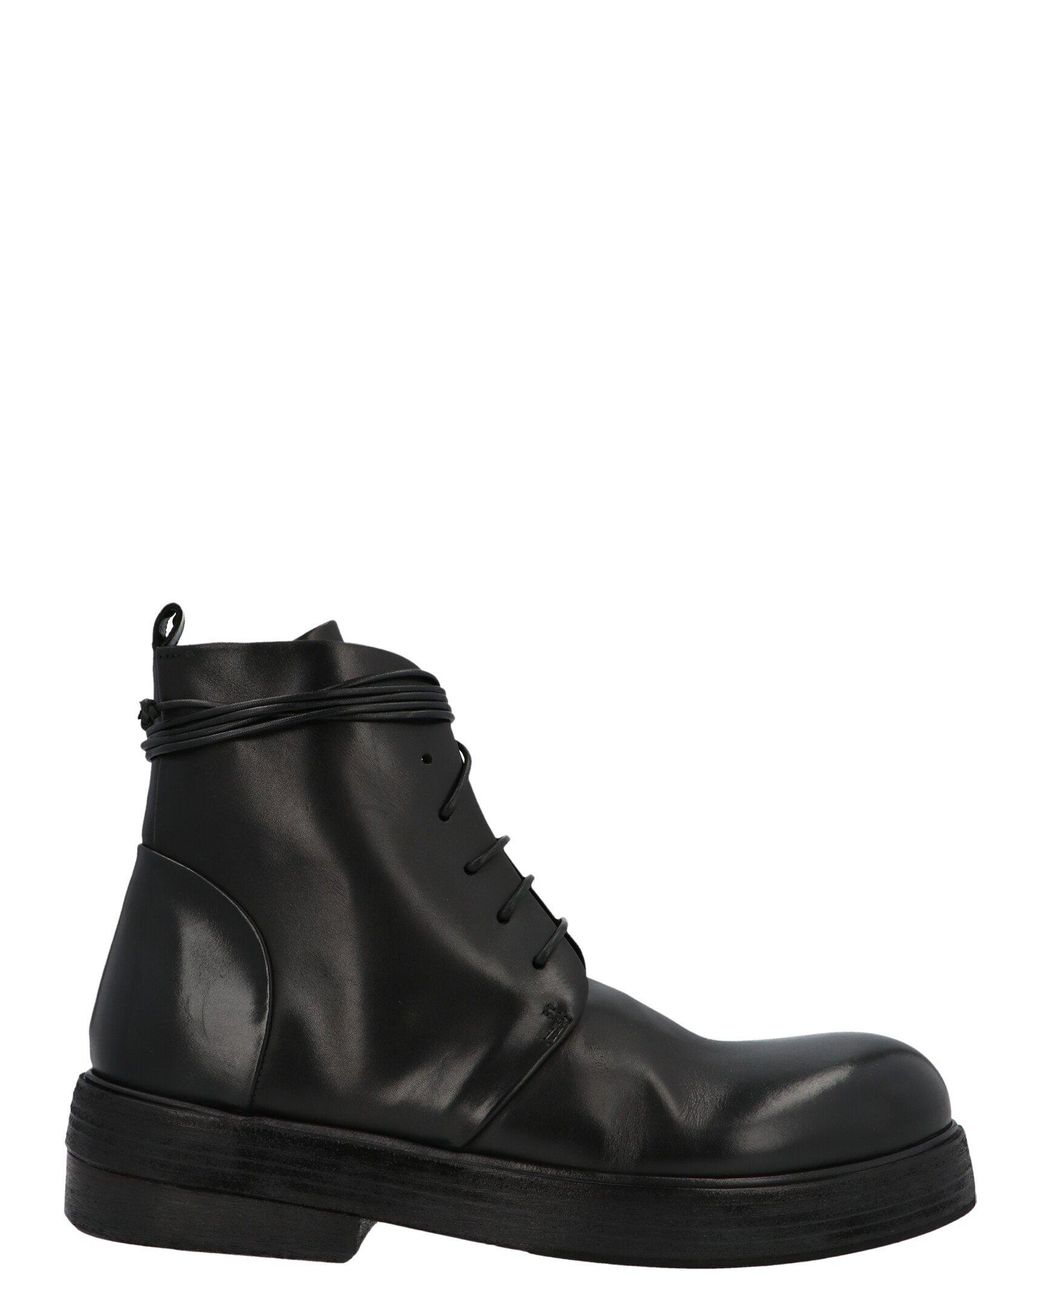 Marsèll Leather Zuccolona Combat Boots in Black for Men - Lyst